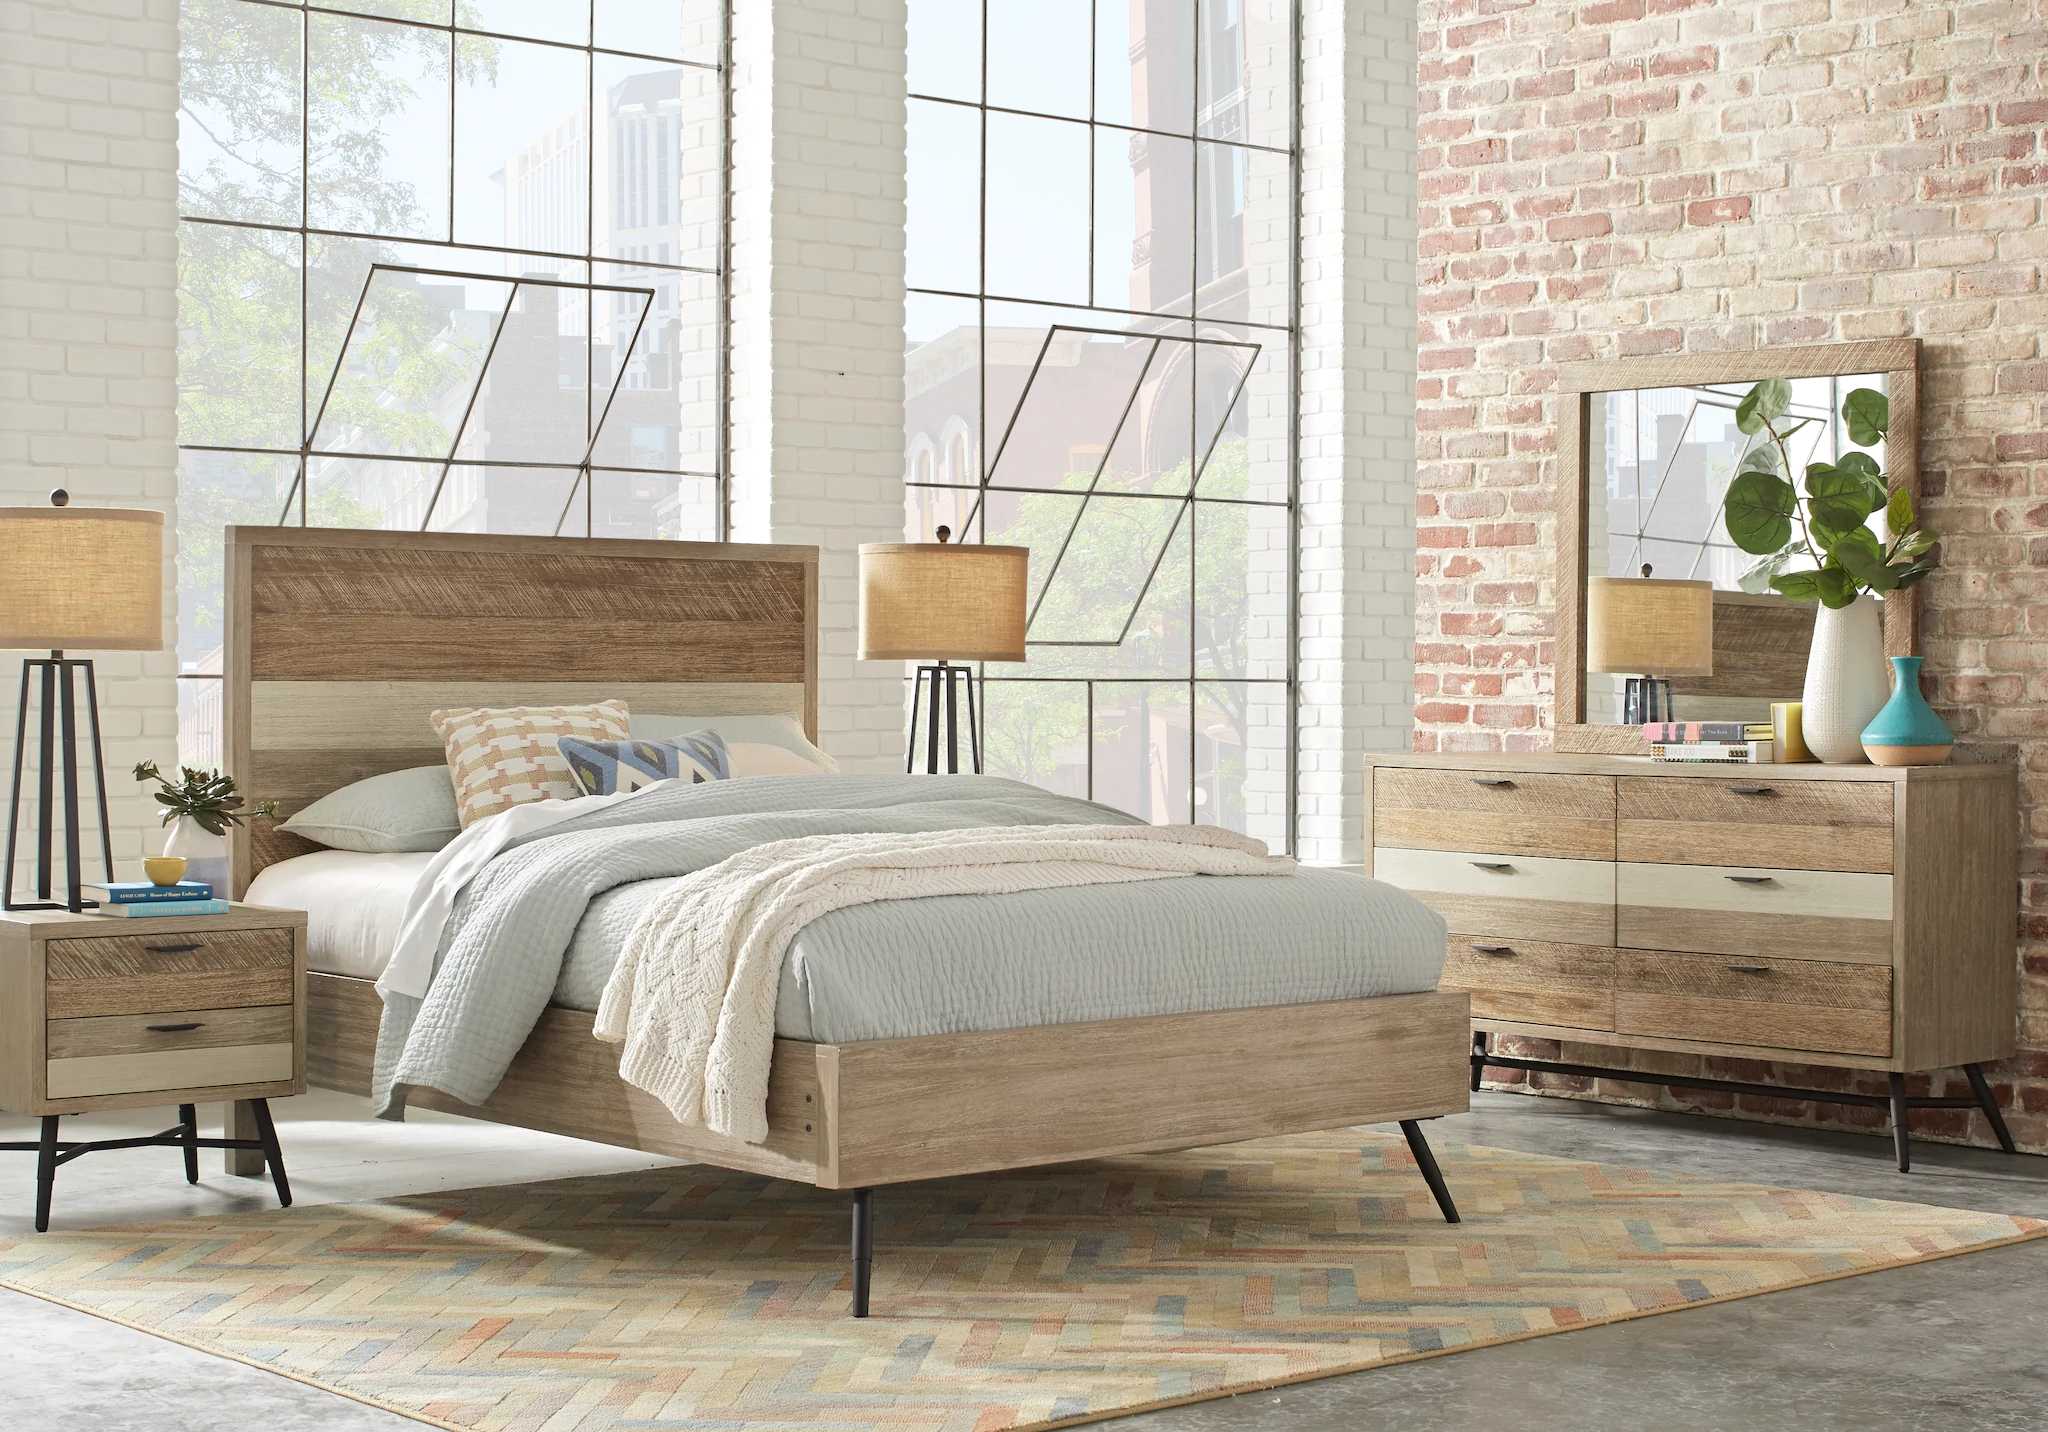 affordable queen bedroom sets for piece suites midtownloft natural midtown loft panel wood accent table five below results restoration hardware cloud sofa tall nesting tables teak